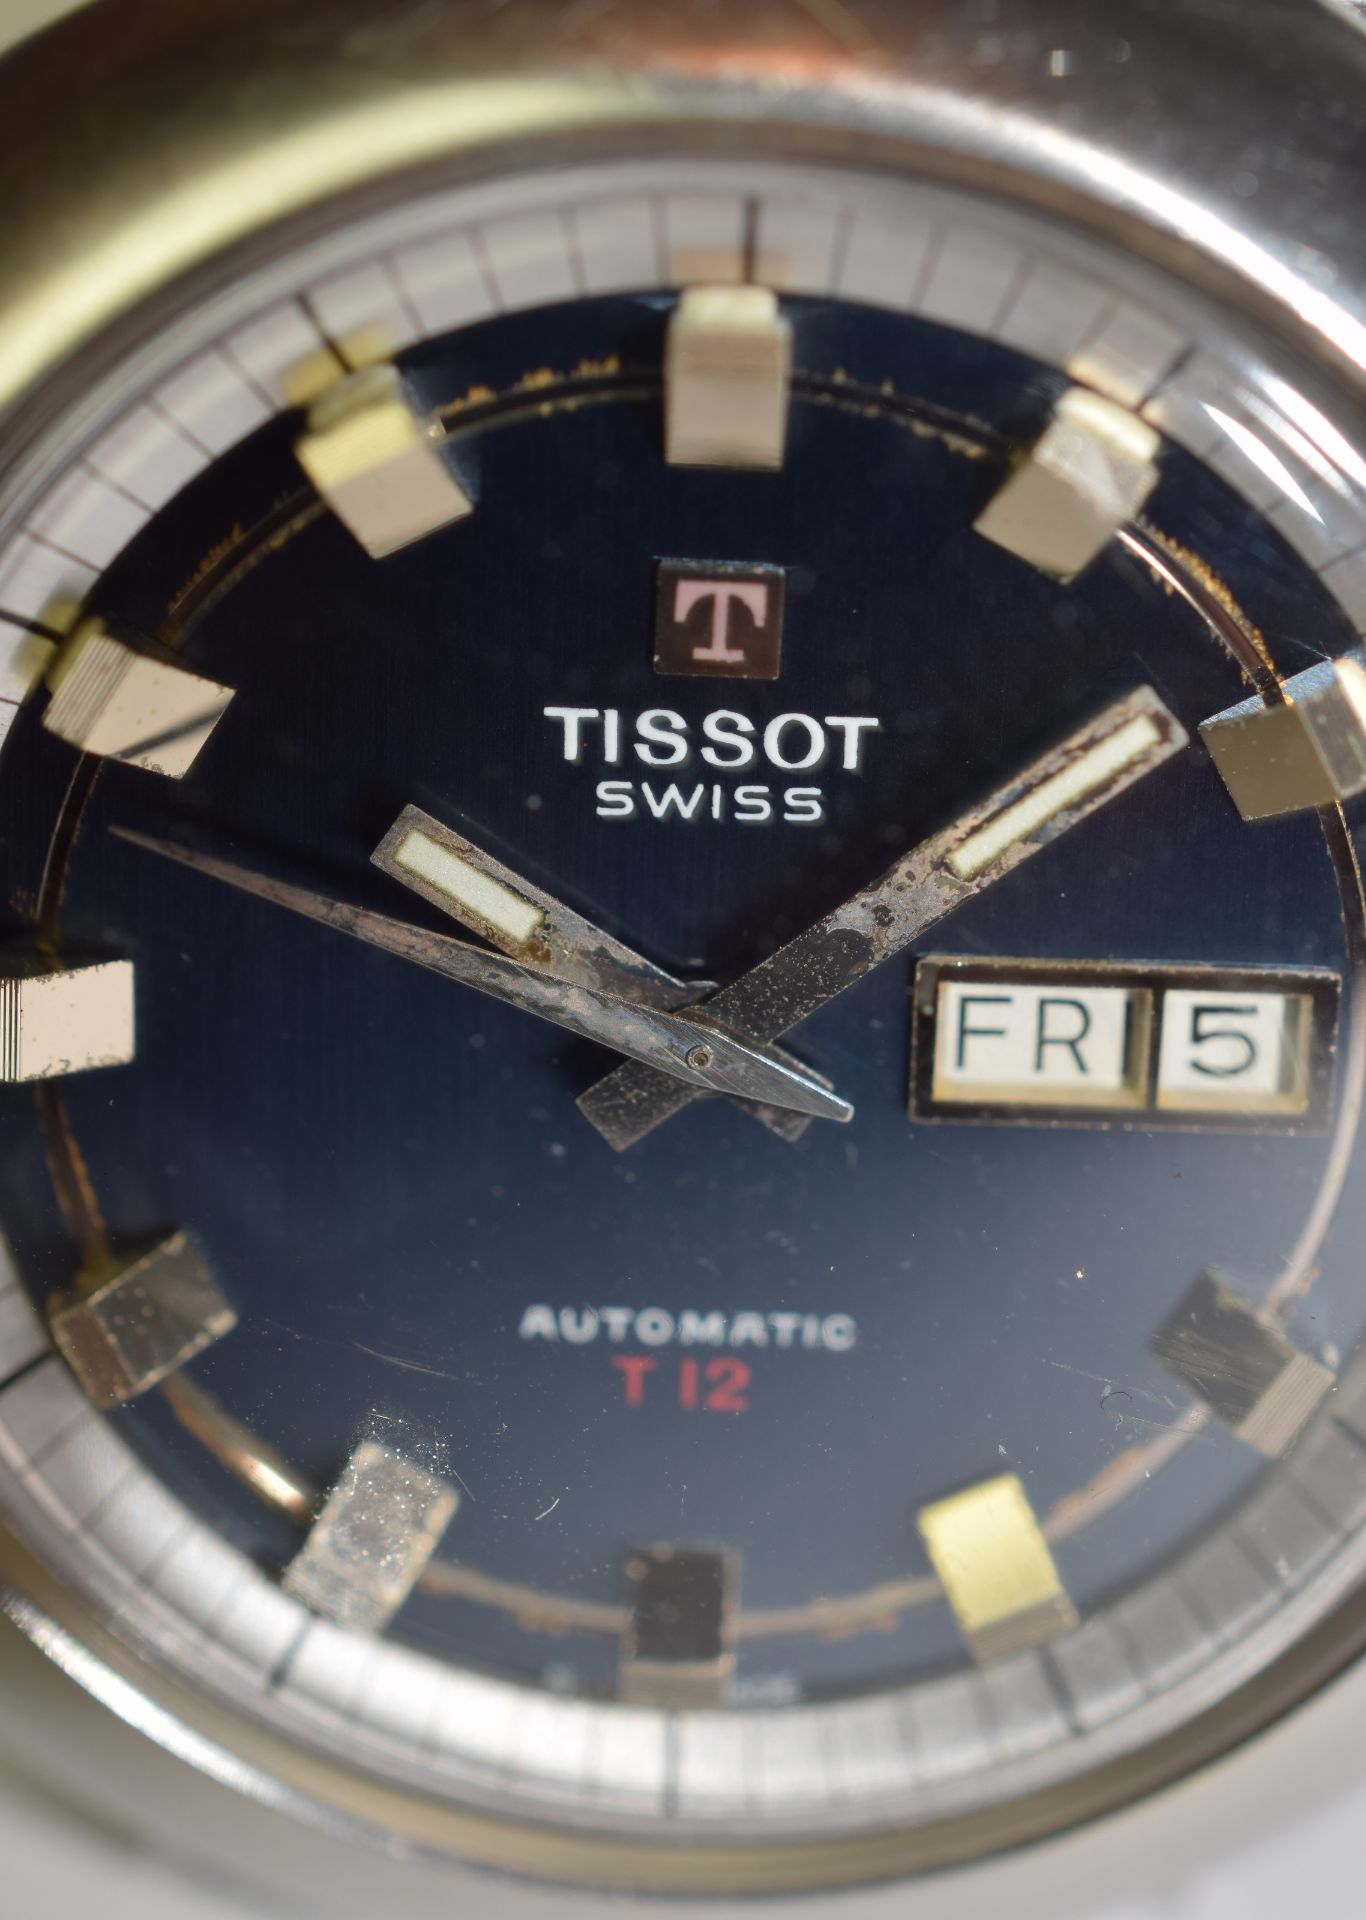 Tissot Automatic T12 On Stainless Steel Bracelet - Image 2 of 5